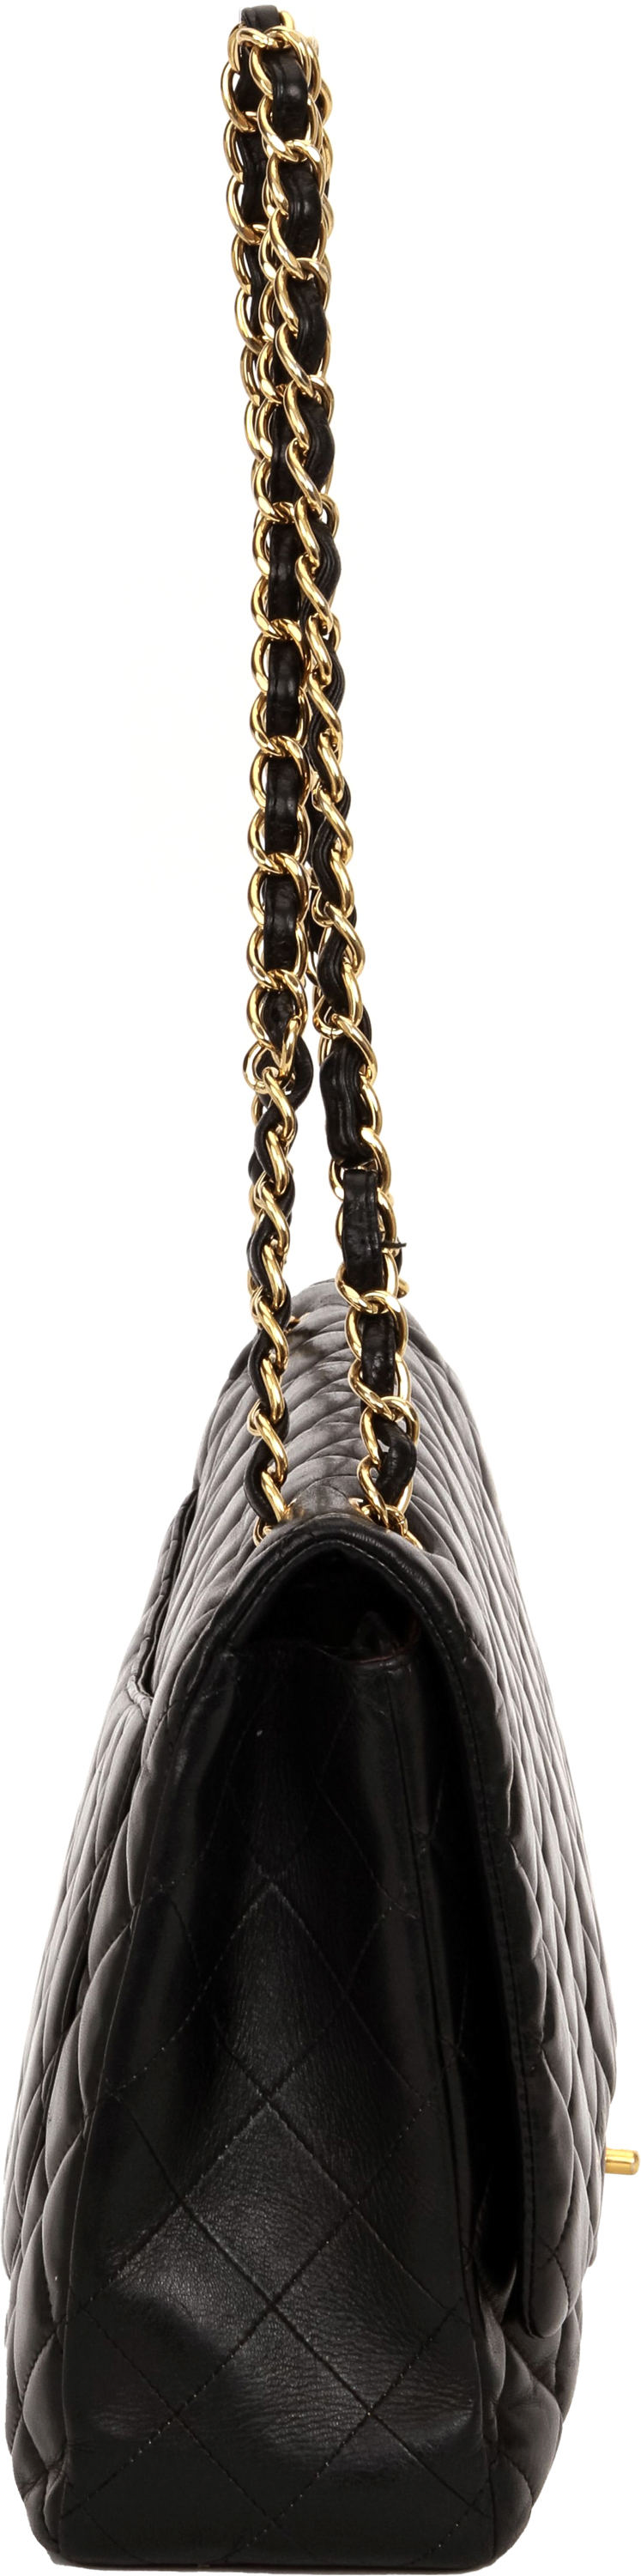 CHANEL CLASSIC FLAP MAXI (1971xxxx) BLACK CAVIAR LEATHER, GOLD HAREDWARE,  WITH CARD, NO DUST COVER